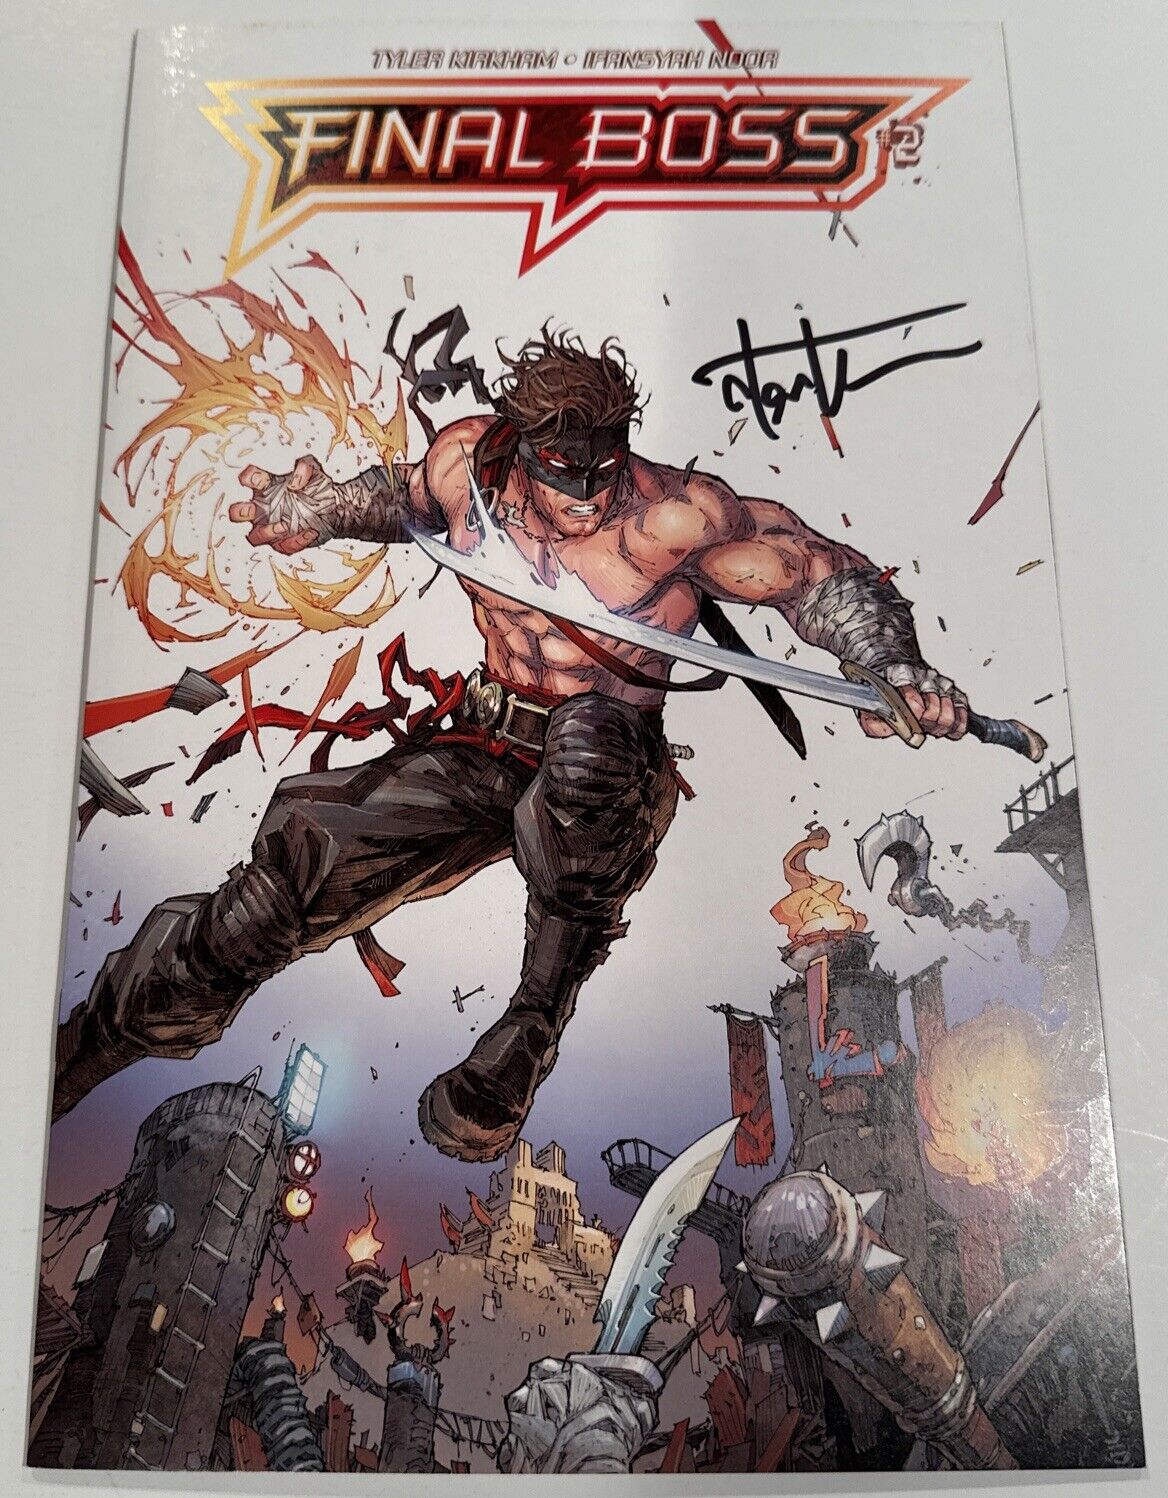 FINAL BOSS #2 - Artists Elite B VARIANT SIGNED BY TYLER KIRKHAM WITH COA Nm+